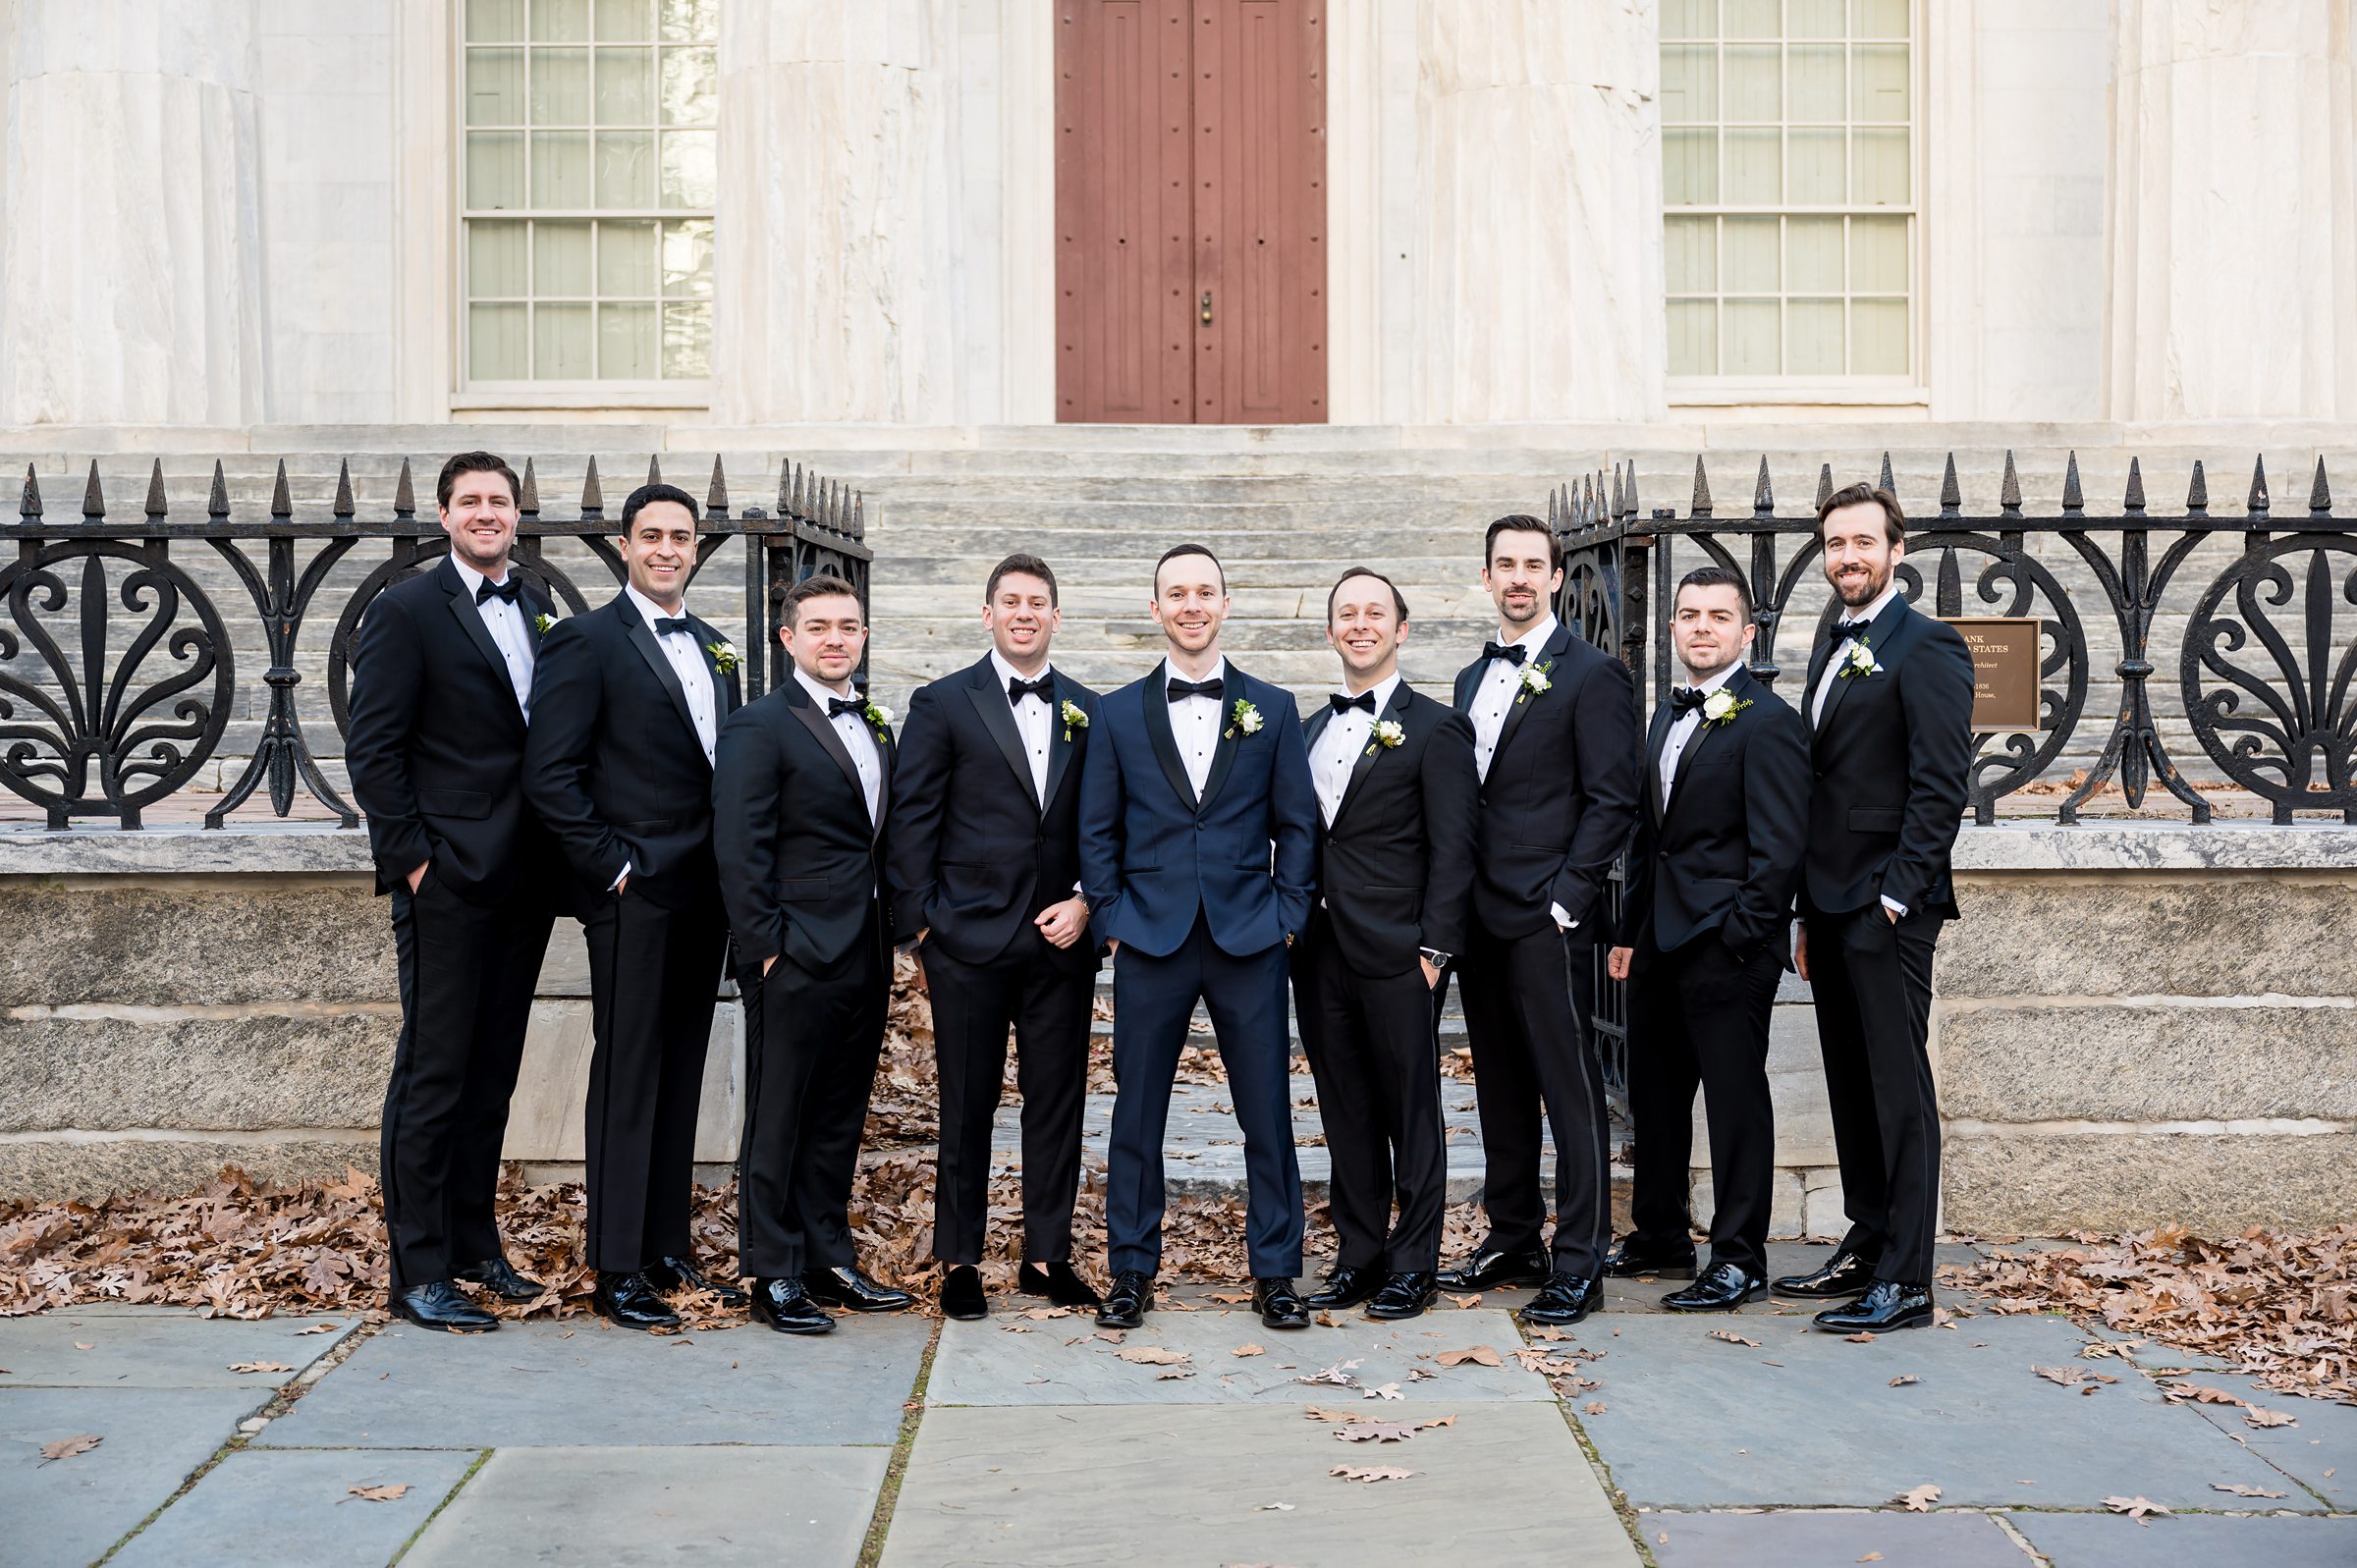 A group of groomsmen posing in front of a building during a Lilah wedding event.